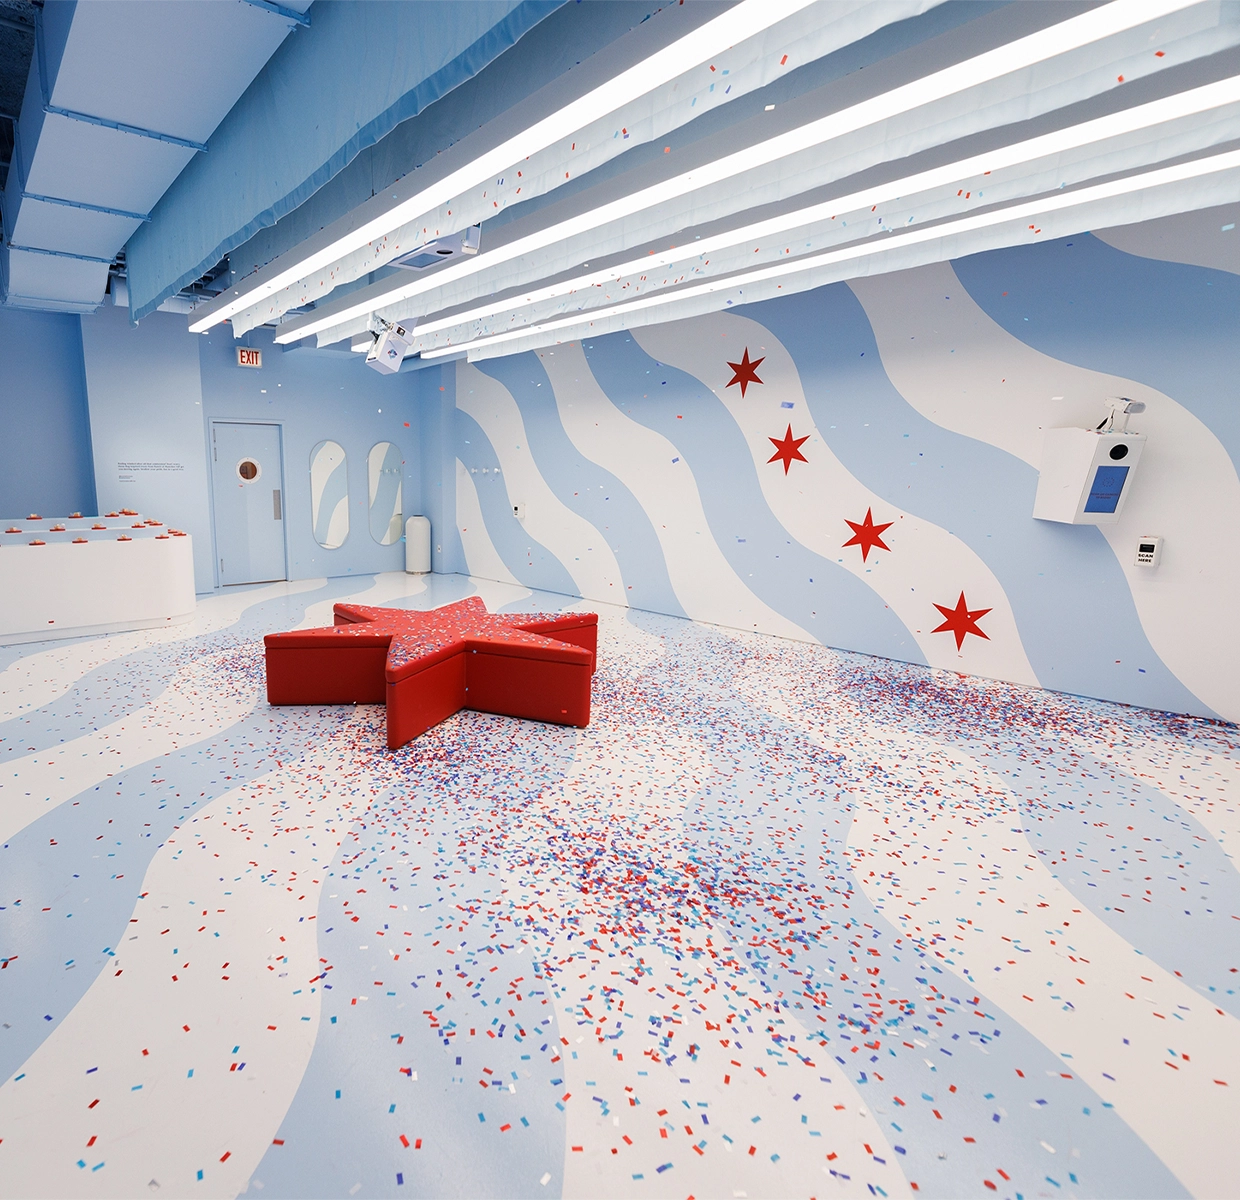 The floor is littered with colorful confetti in a room designed with wavy blue patterns and star decorations, offering a playful photo op at the Color Factory